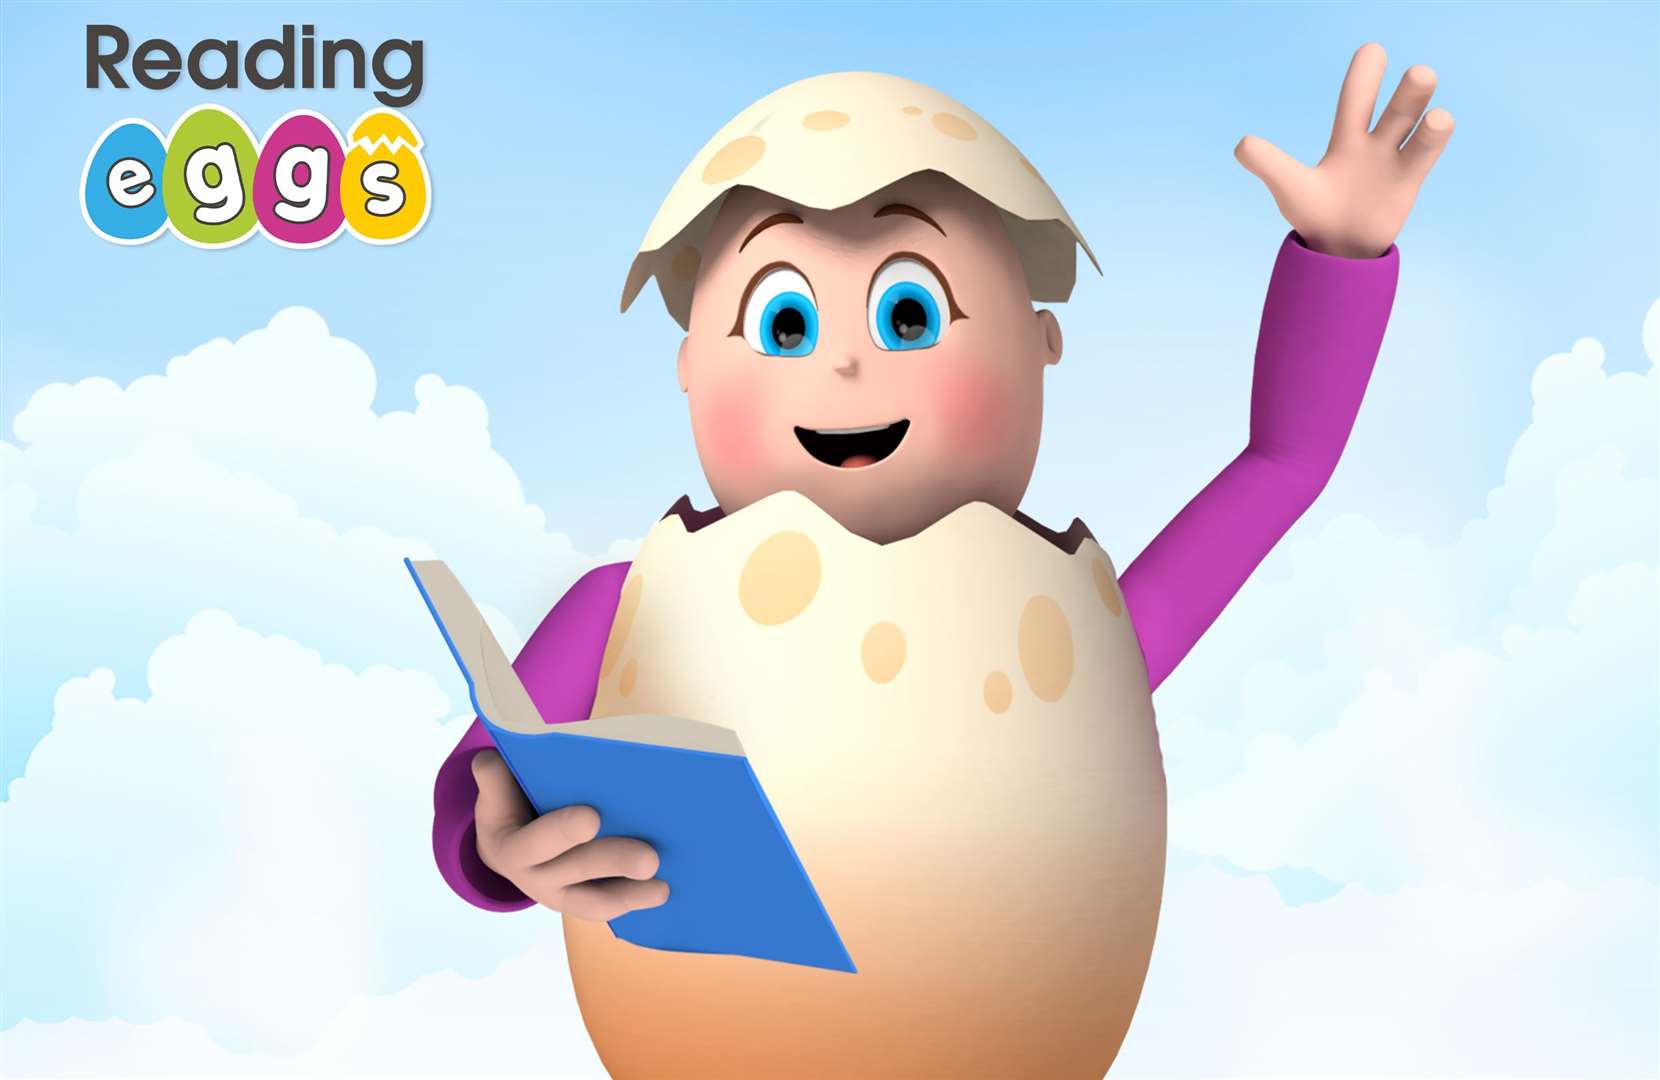 Reading Eggs is offering parents 30 days of free access